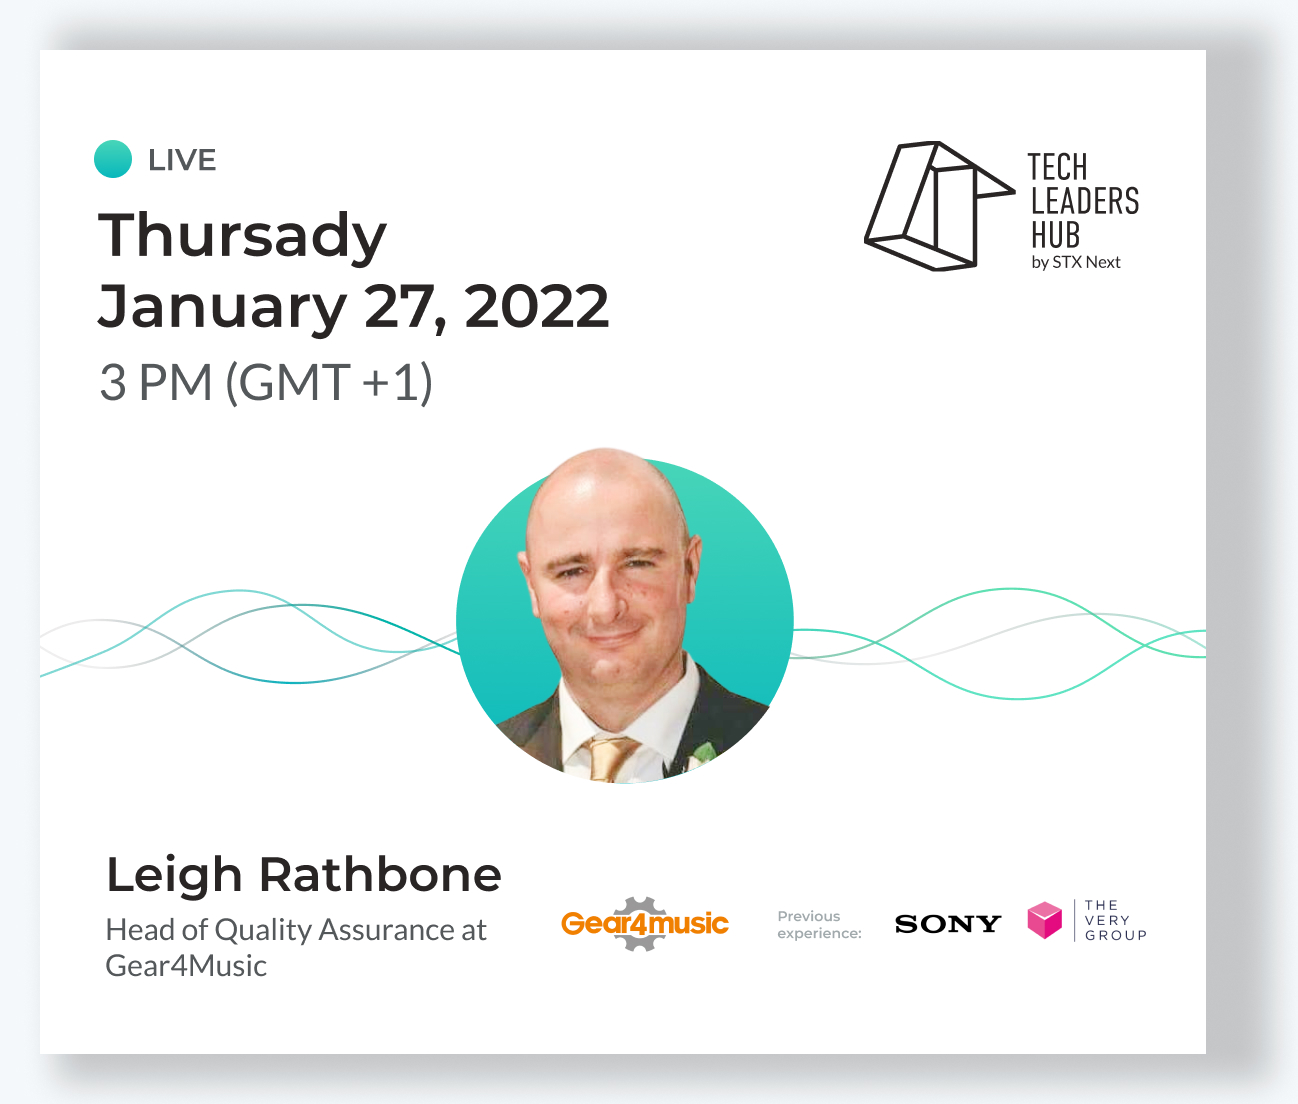 Next session banner - Tech Leaders Hub #14 with Leigh Rathbone